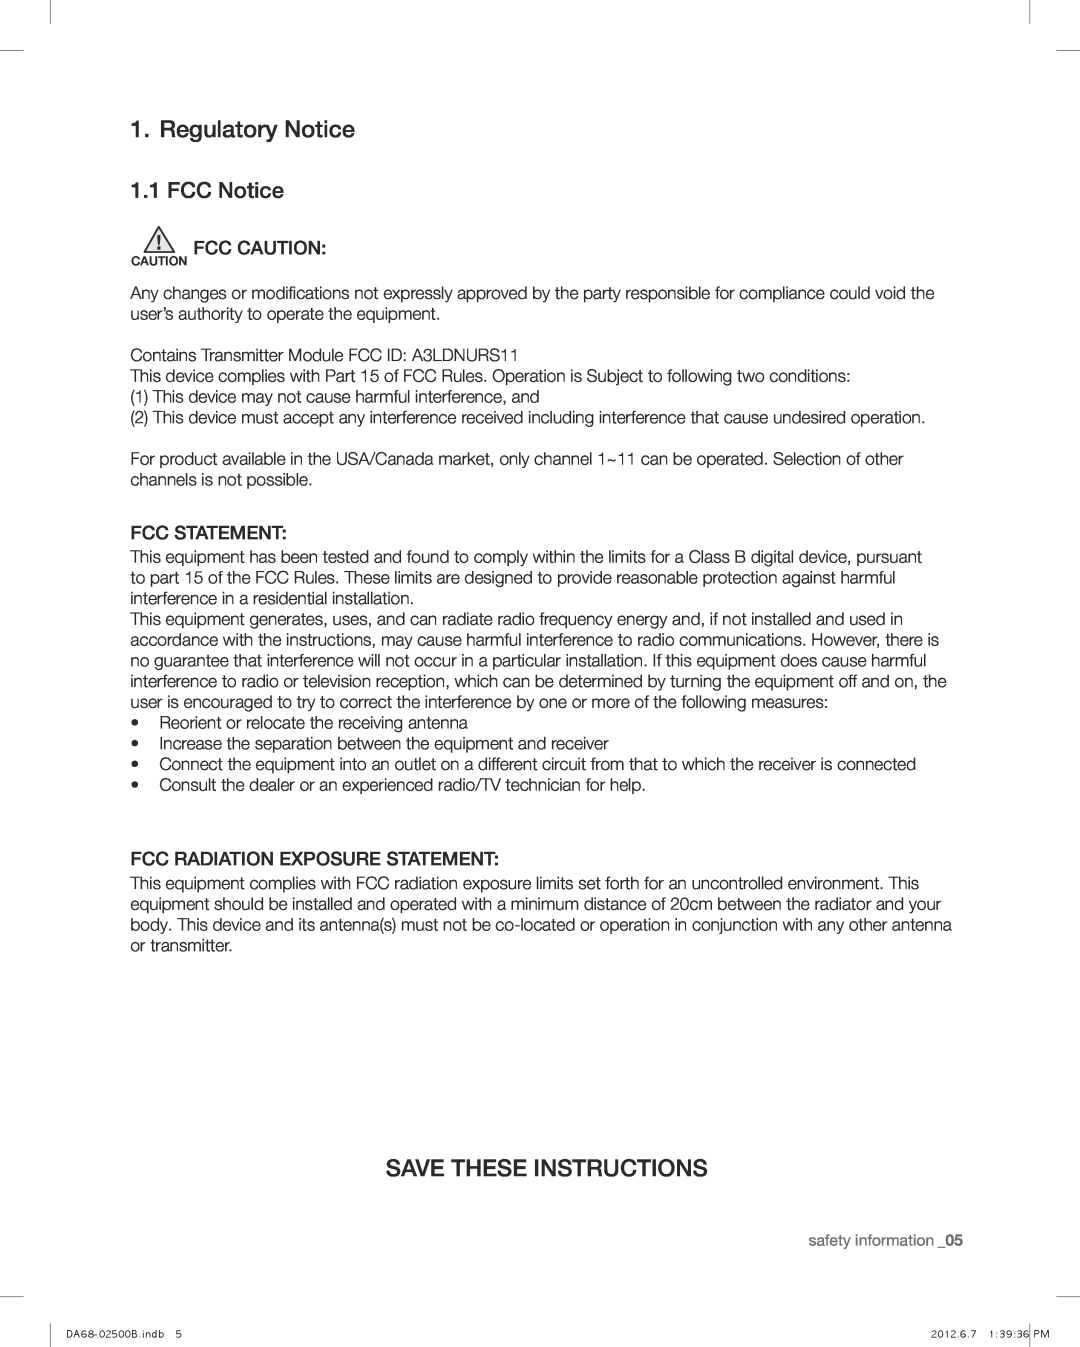 Samsung RSG309AARS user manual Regulatory Notice, Save These Instructions, FCC Notice, Fcc Caution, Fcc Statement 